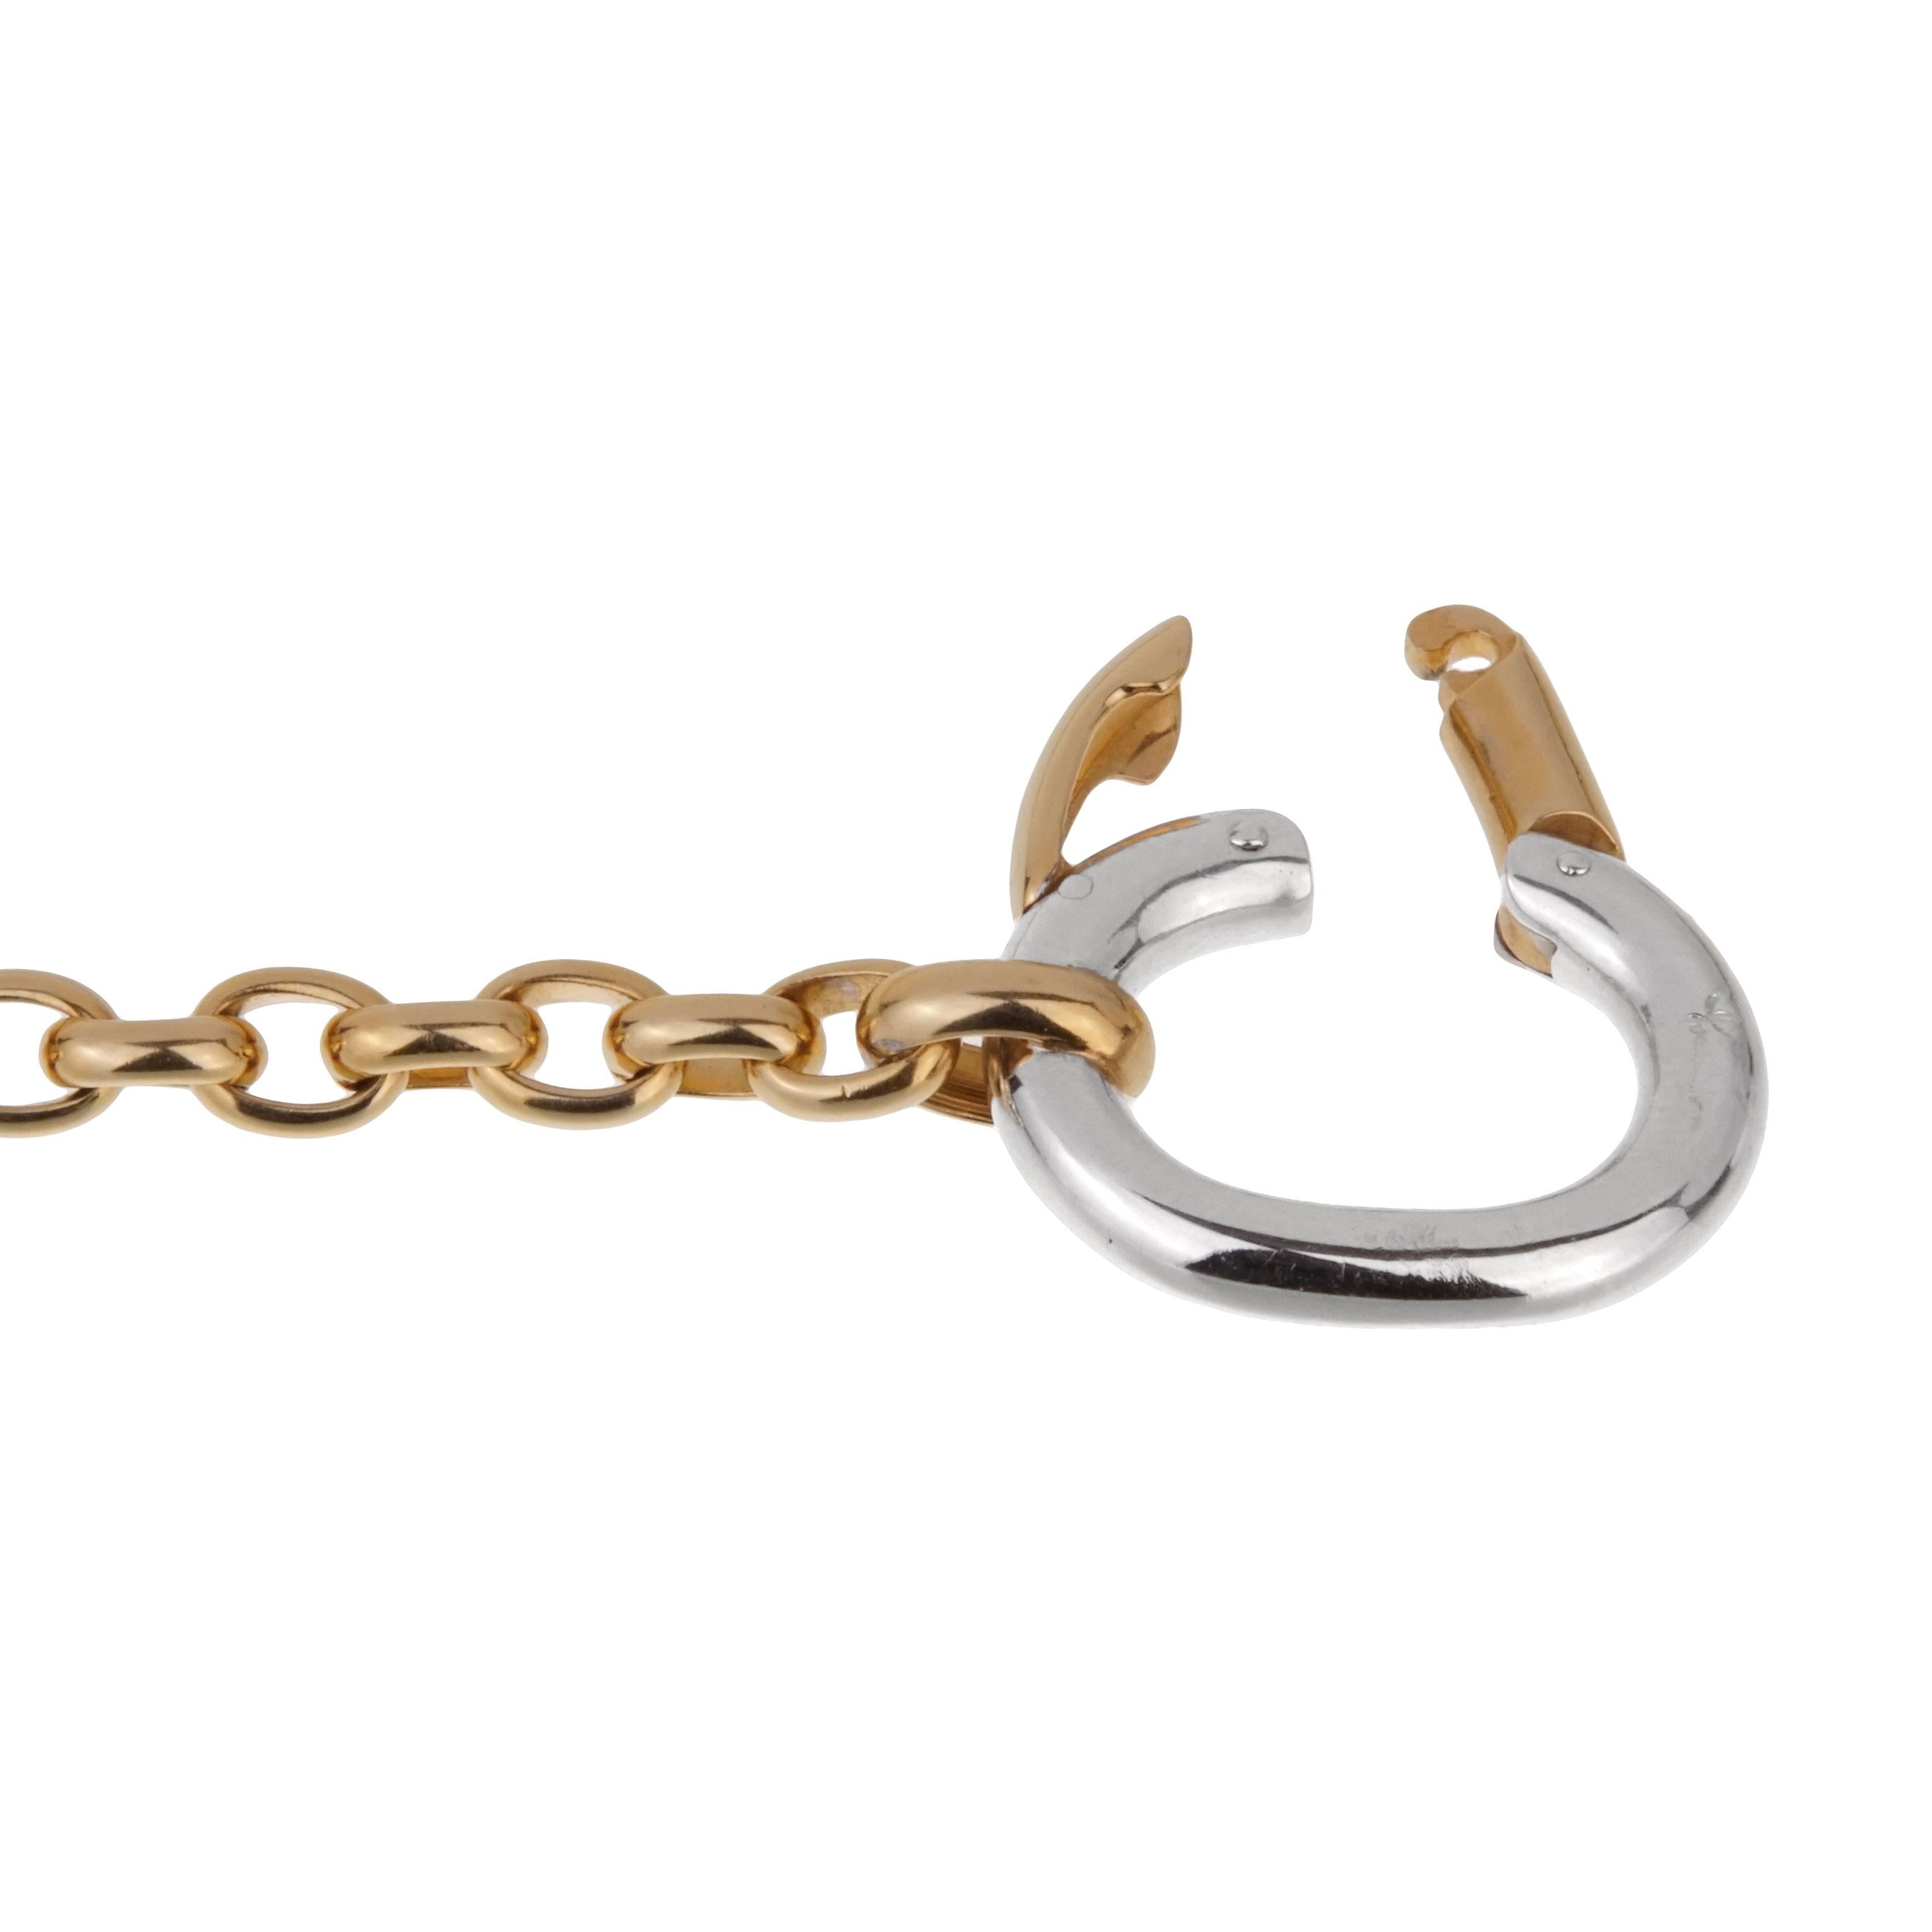 A chic Pomellato chain link necklace featuring a yellow gold chain link finished with an oversized white gold clasp in 18k gold. The necklace measures 20